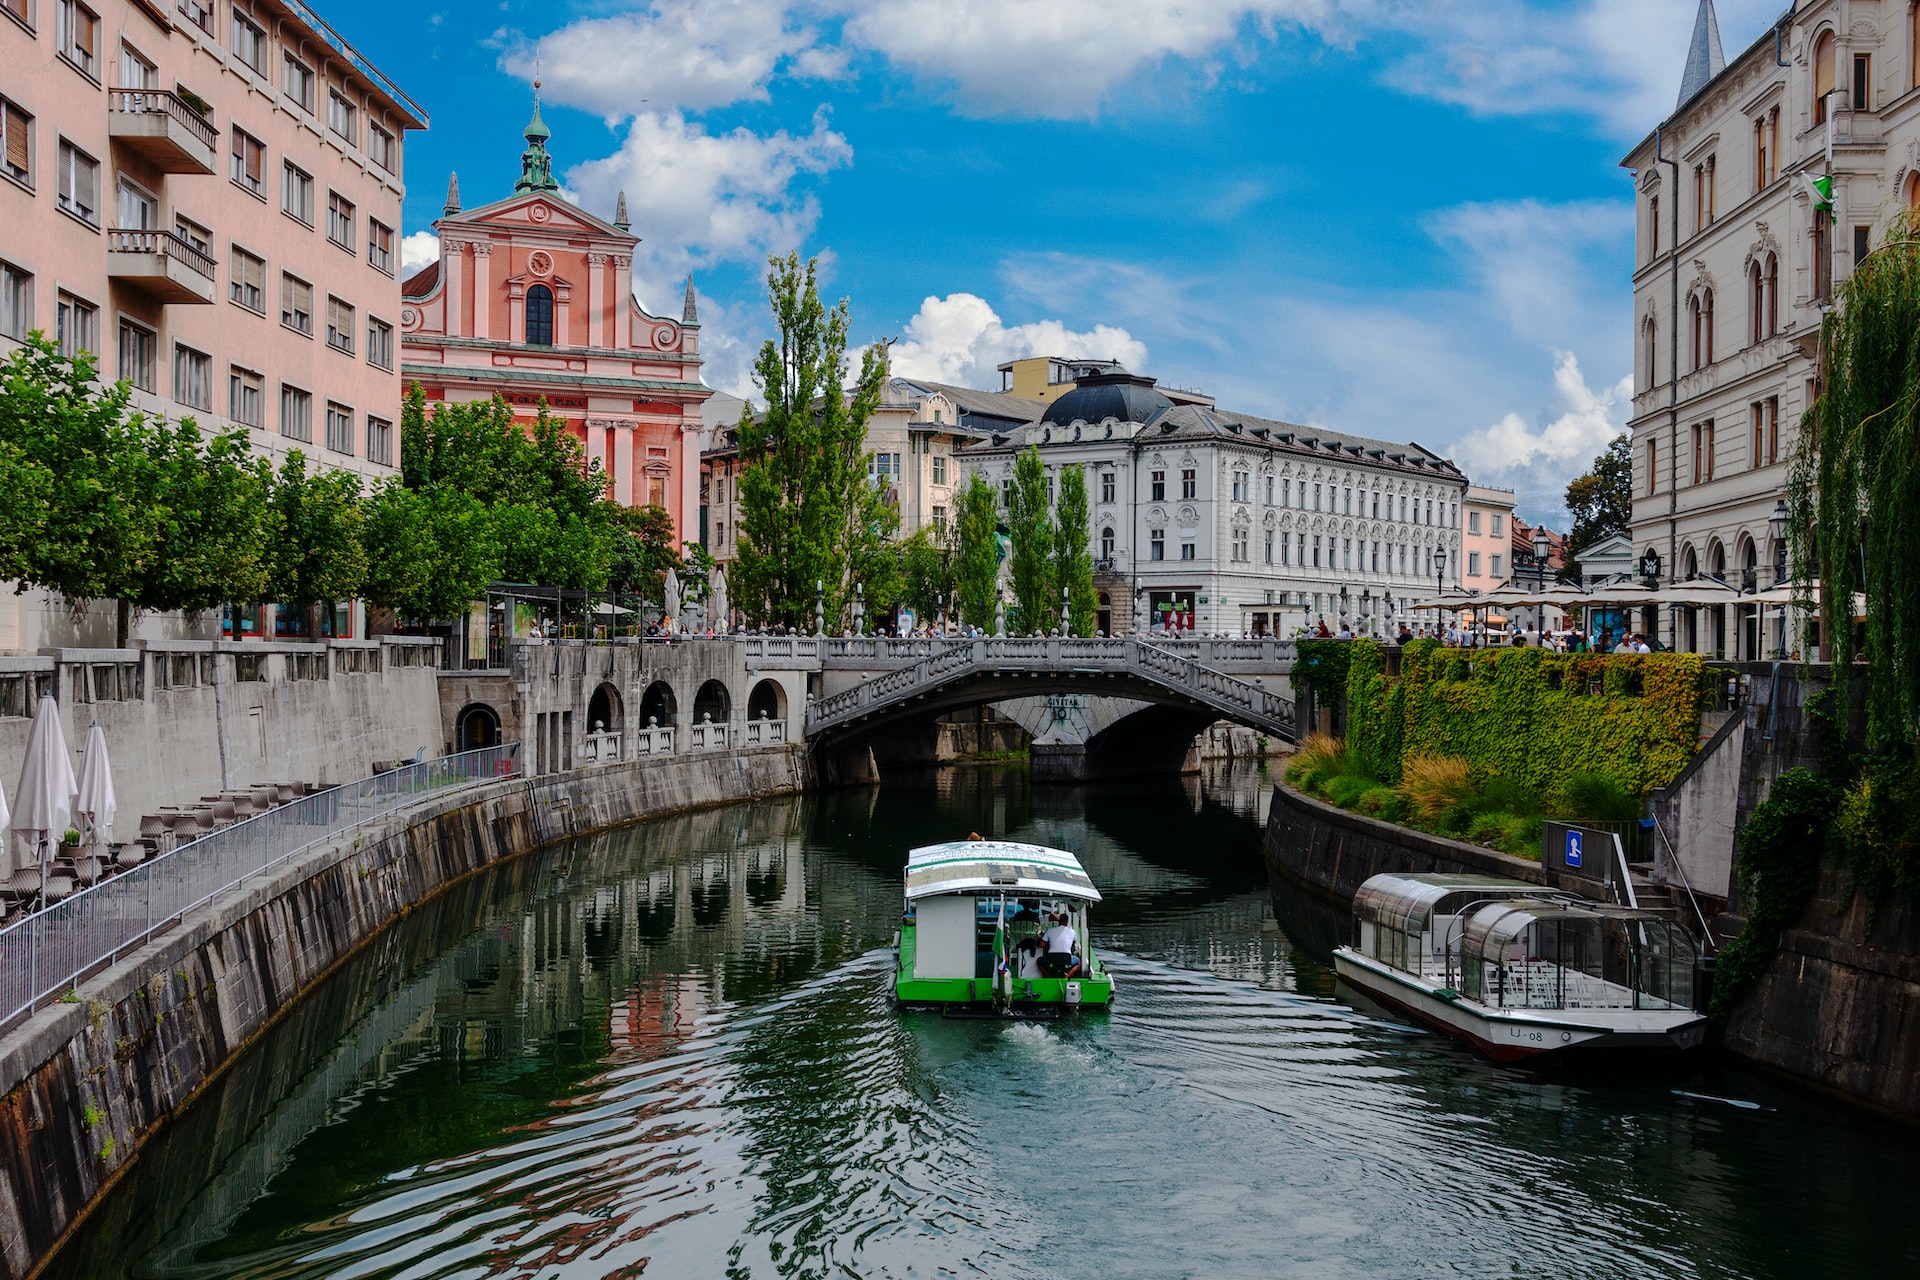 Ljubljana, Slovenia is one of the best cities to visit in Eastern Europe